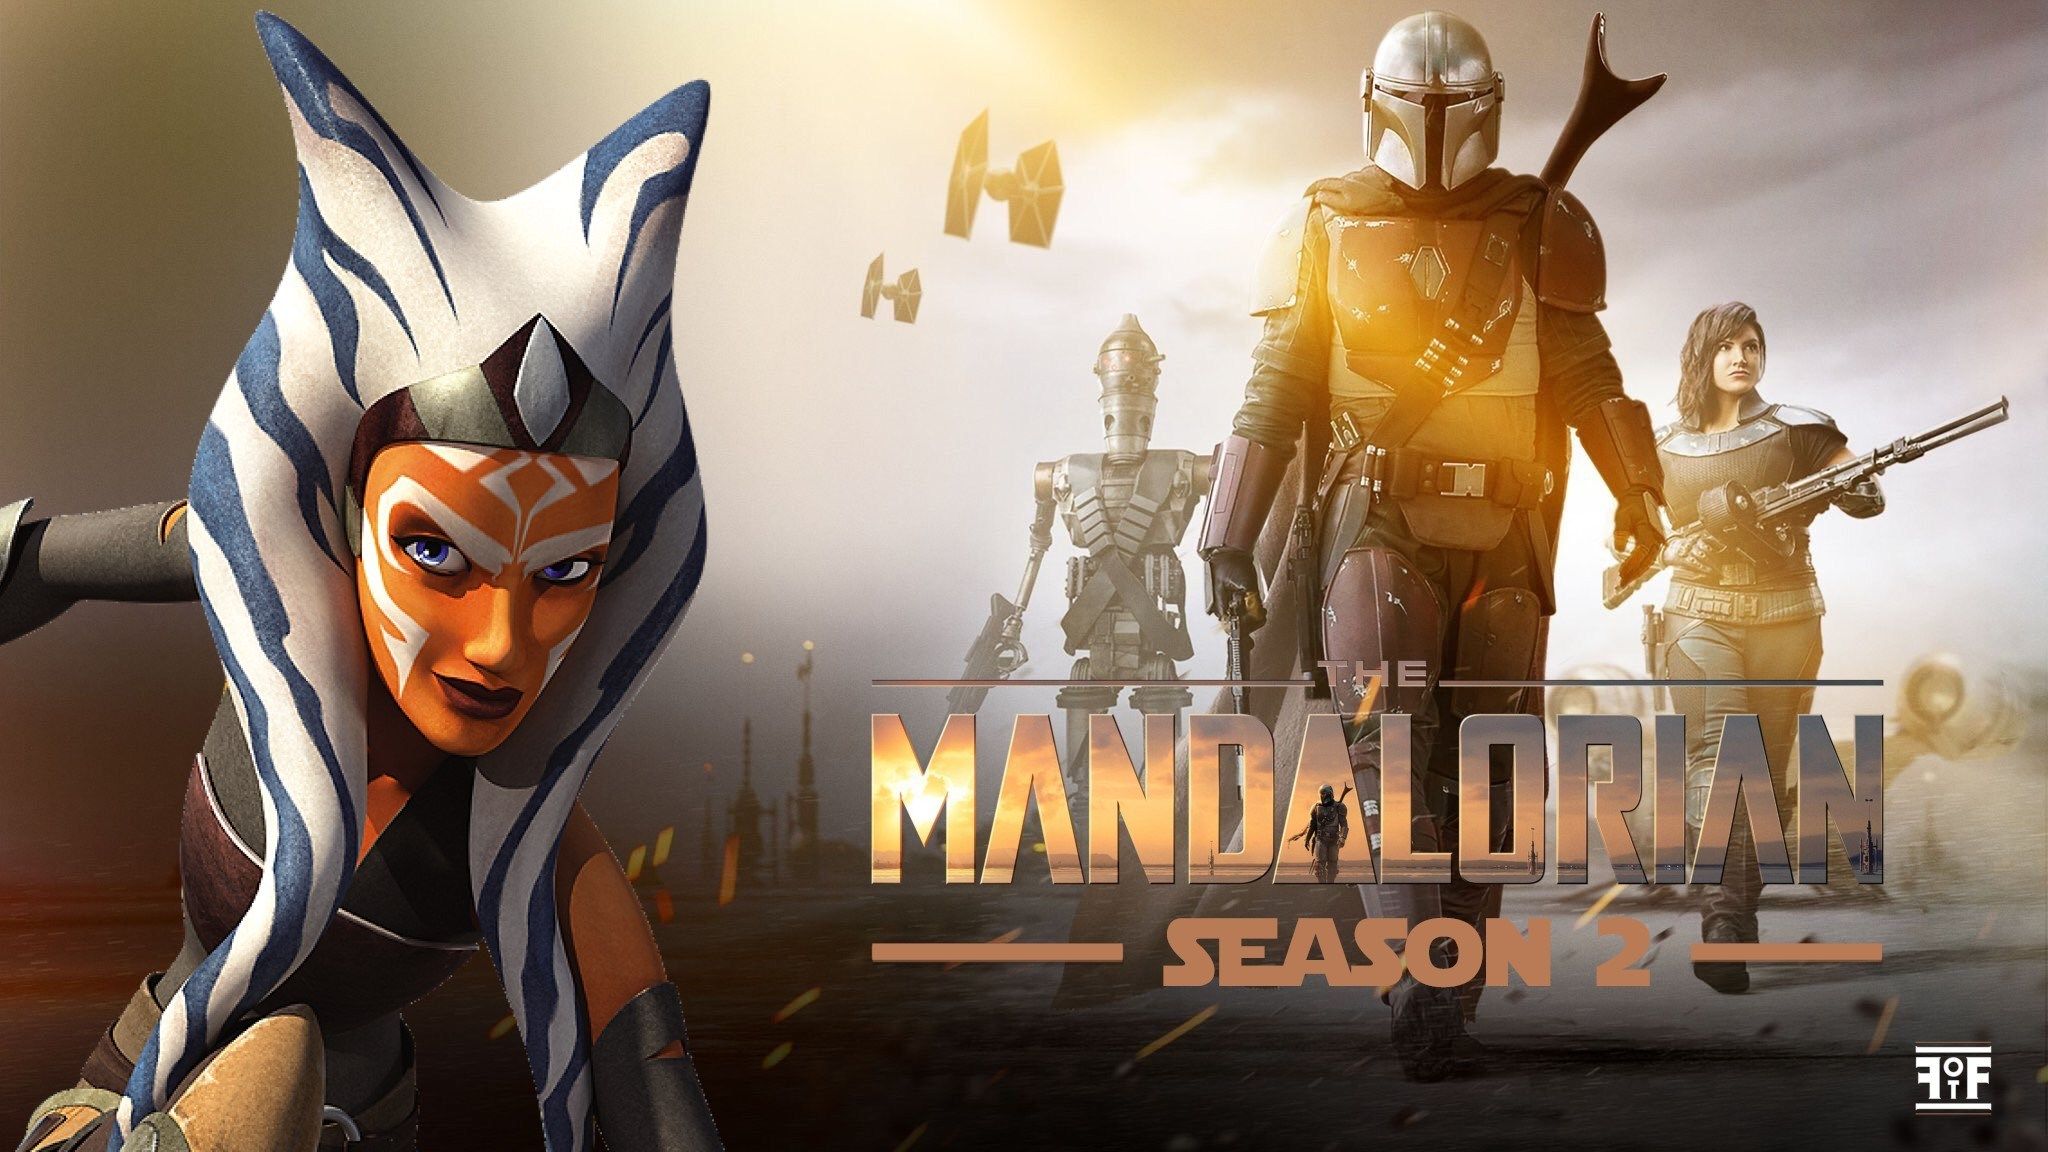 Does the Ultimate Lightsaber Duel Await Us in 'The Mandalorian' Season 2?. Future of the Force